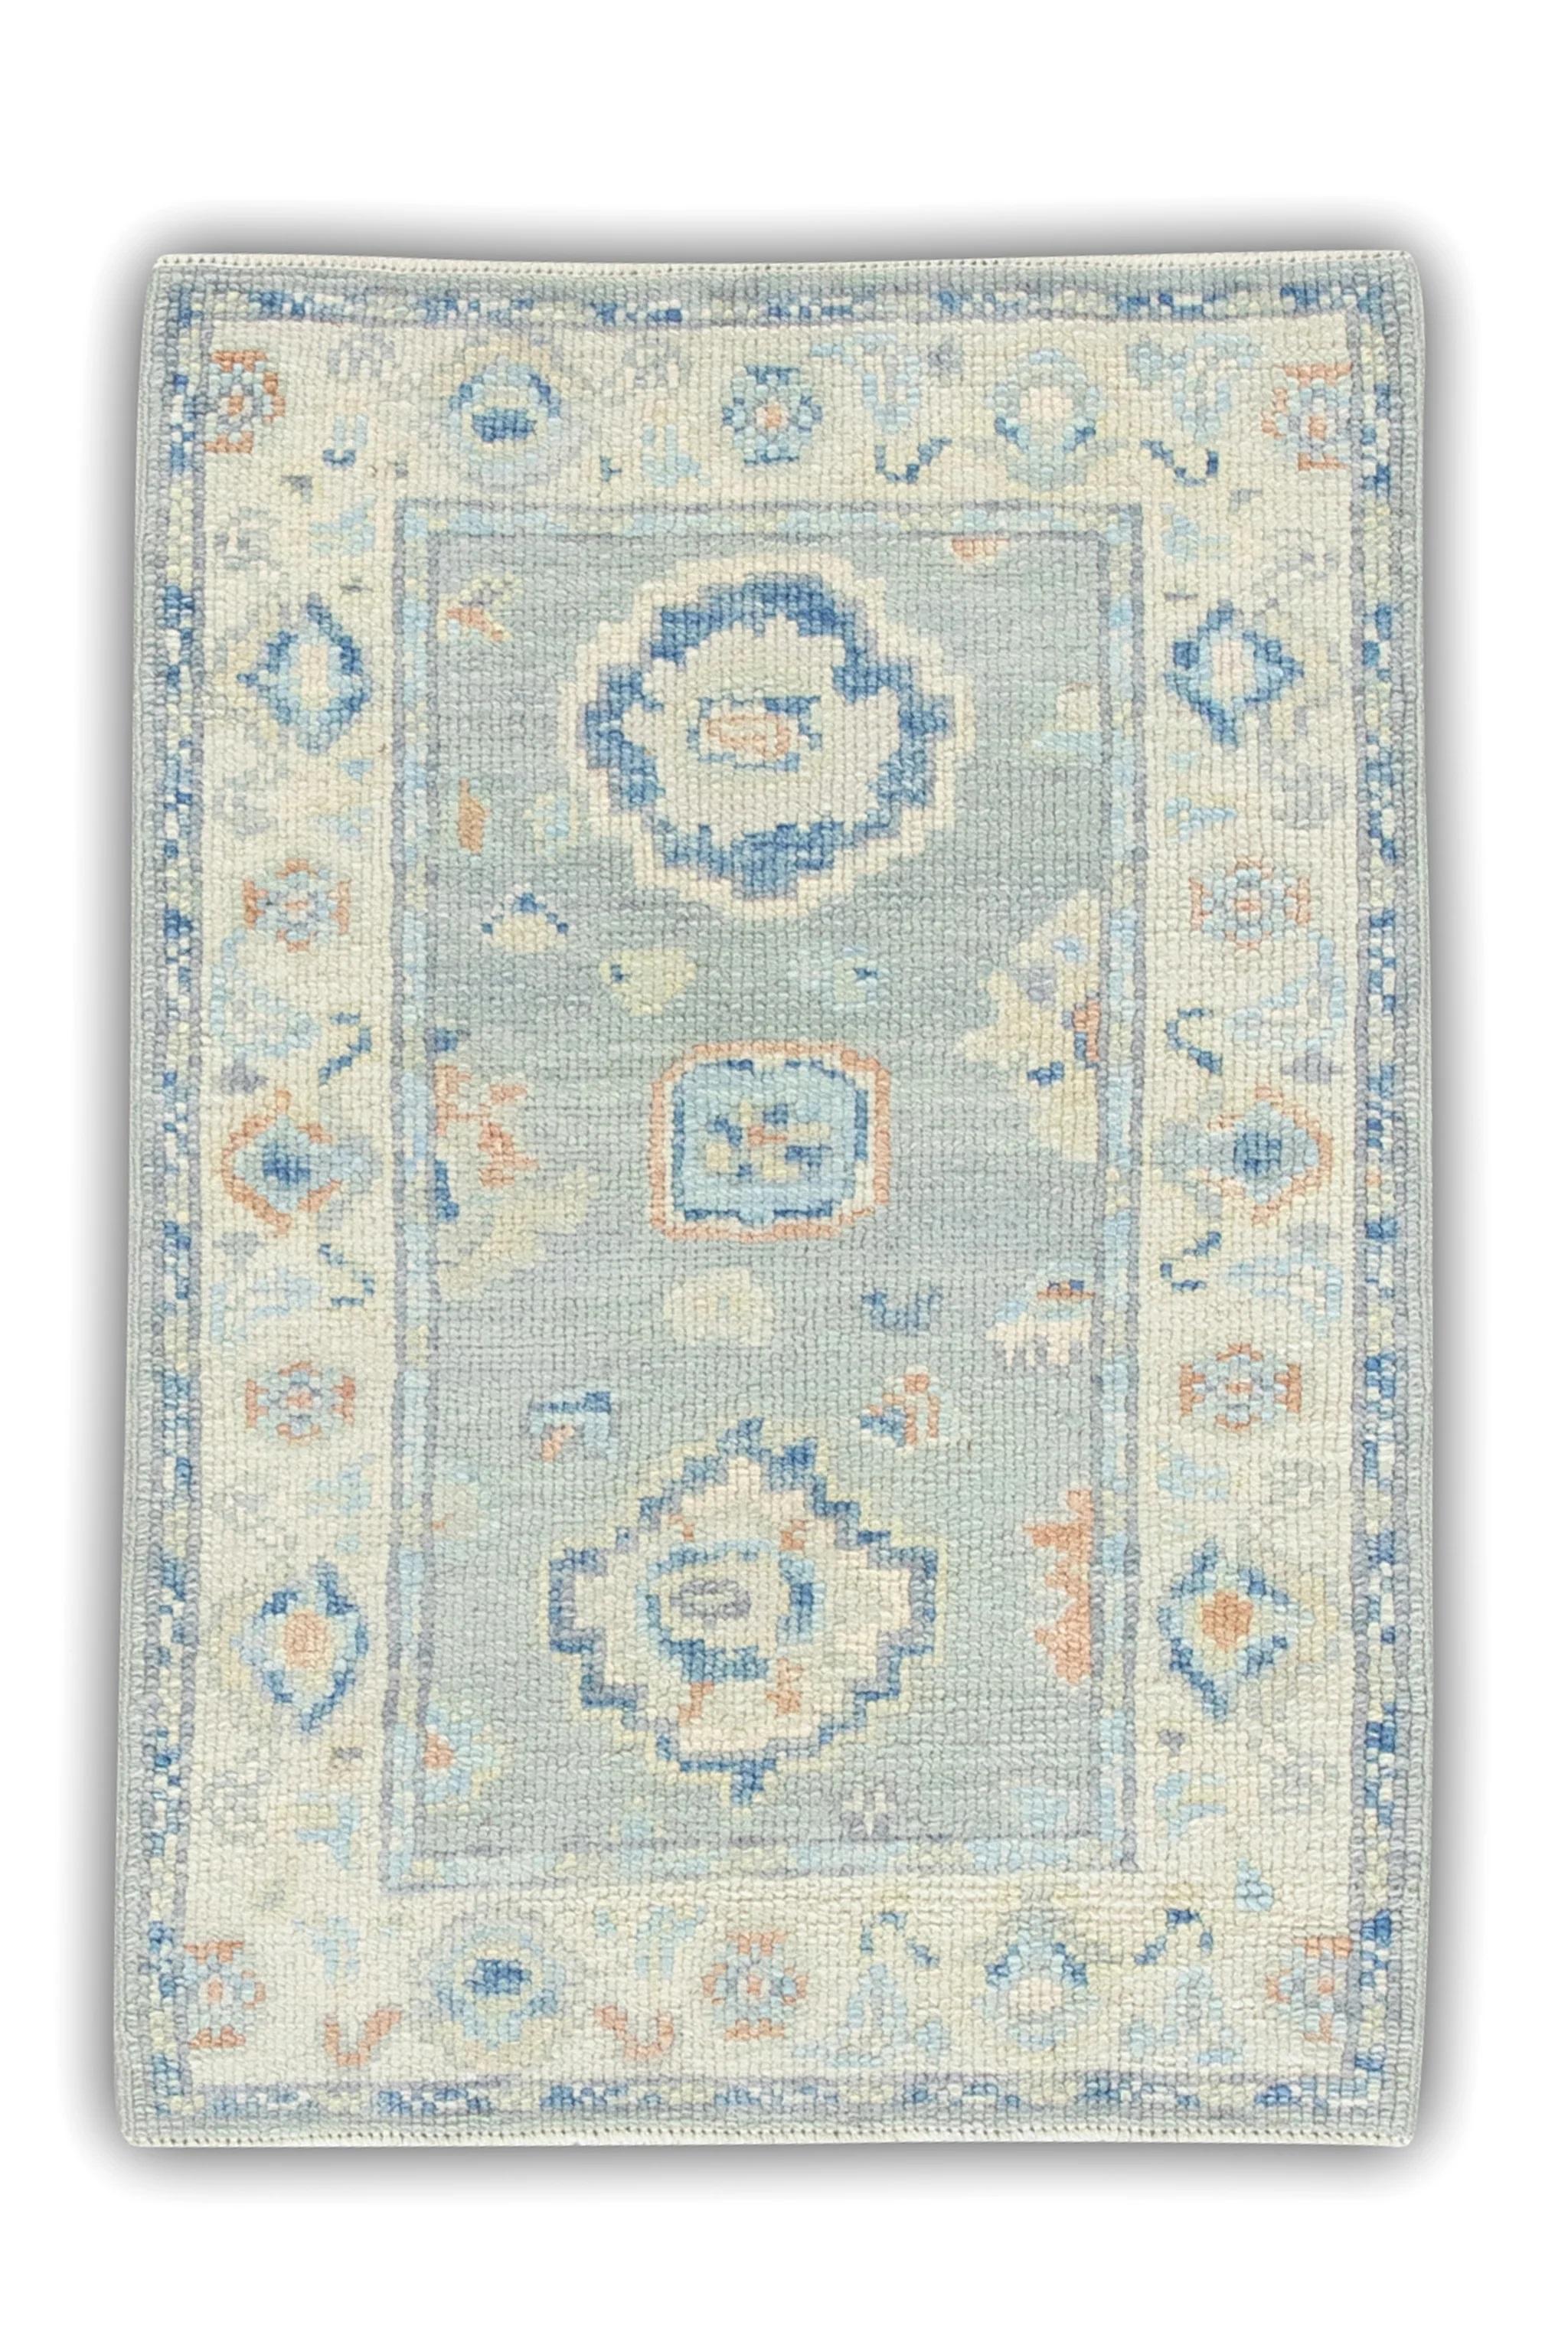 Contemporary Blue Handwoven Wool Turkish Oushak Rug in Salmon Floral Design 2'1